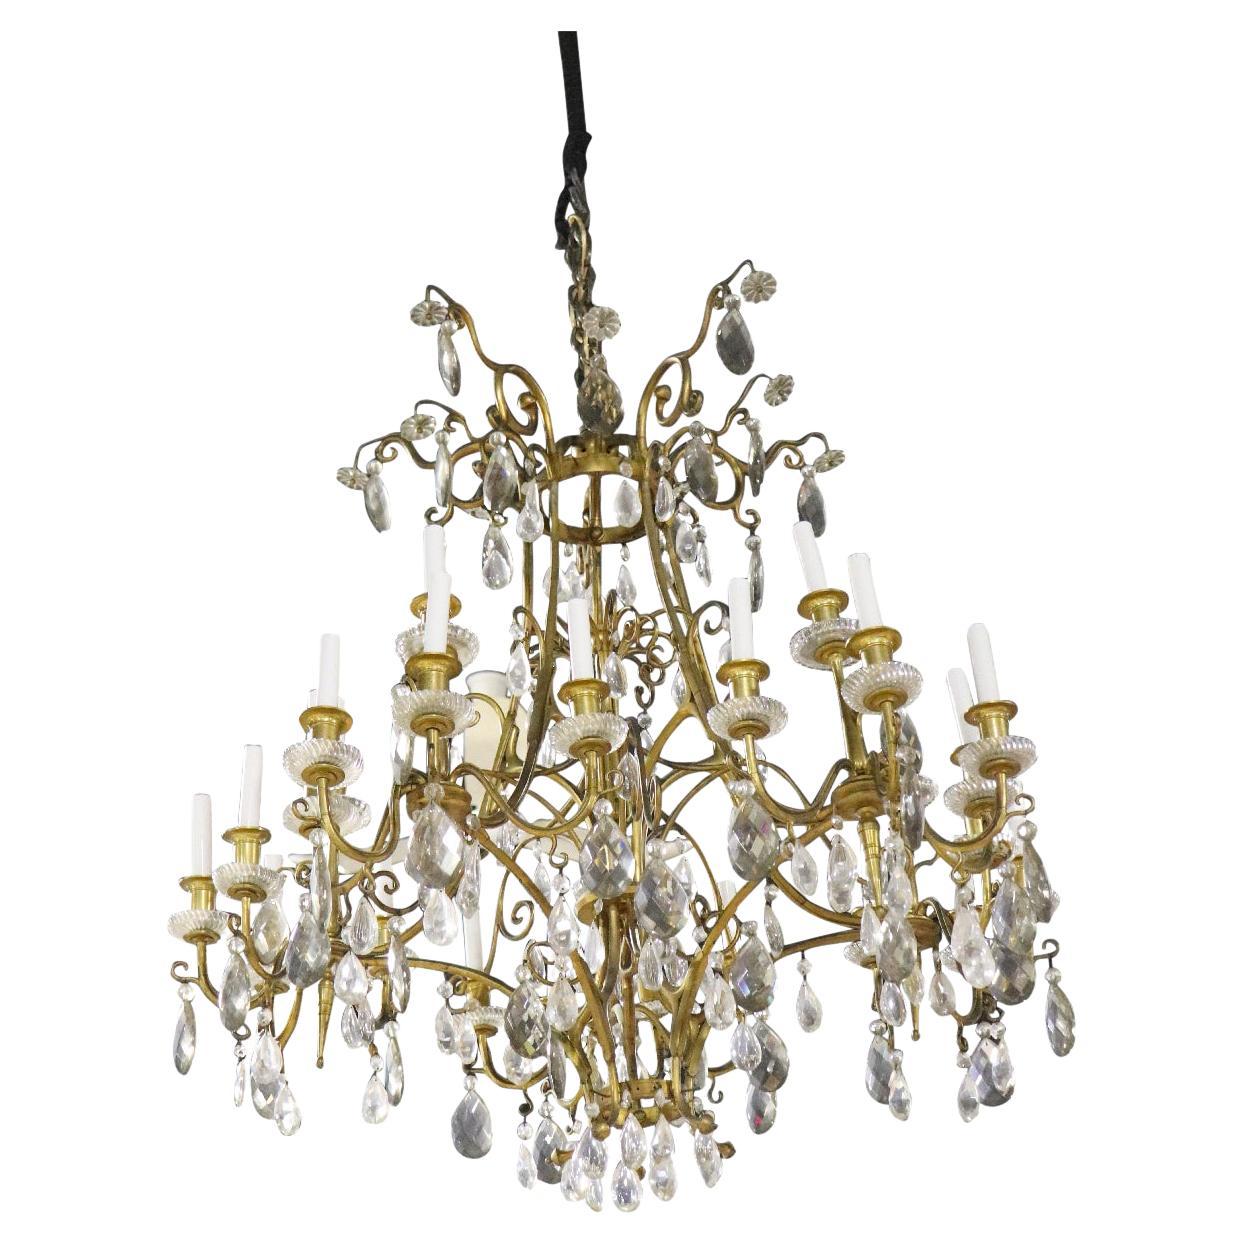 Fantastic Russian Neoclassical Dore' Gilt Rock Crystal and Crystal Chandelier For Sale